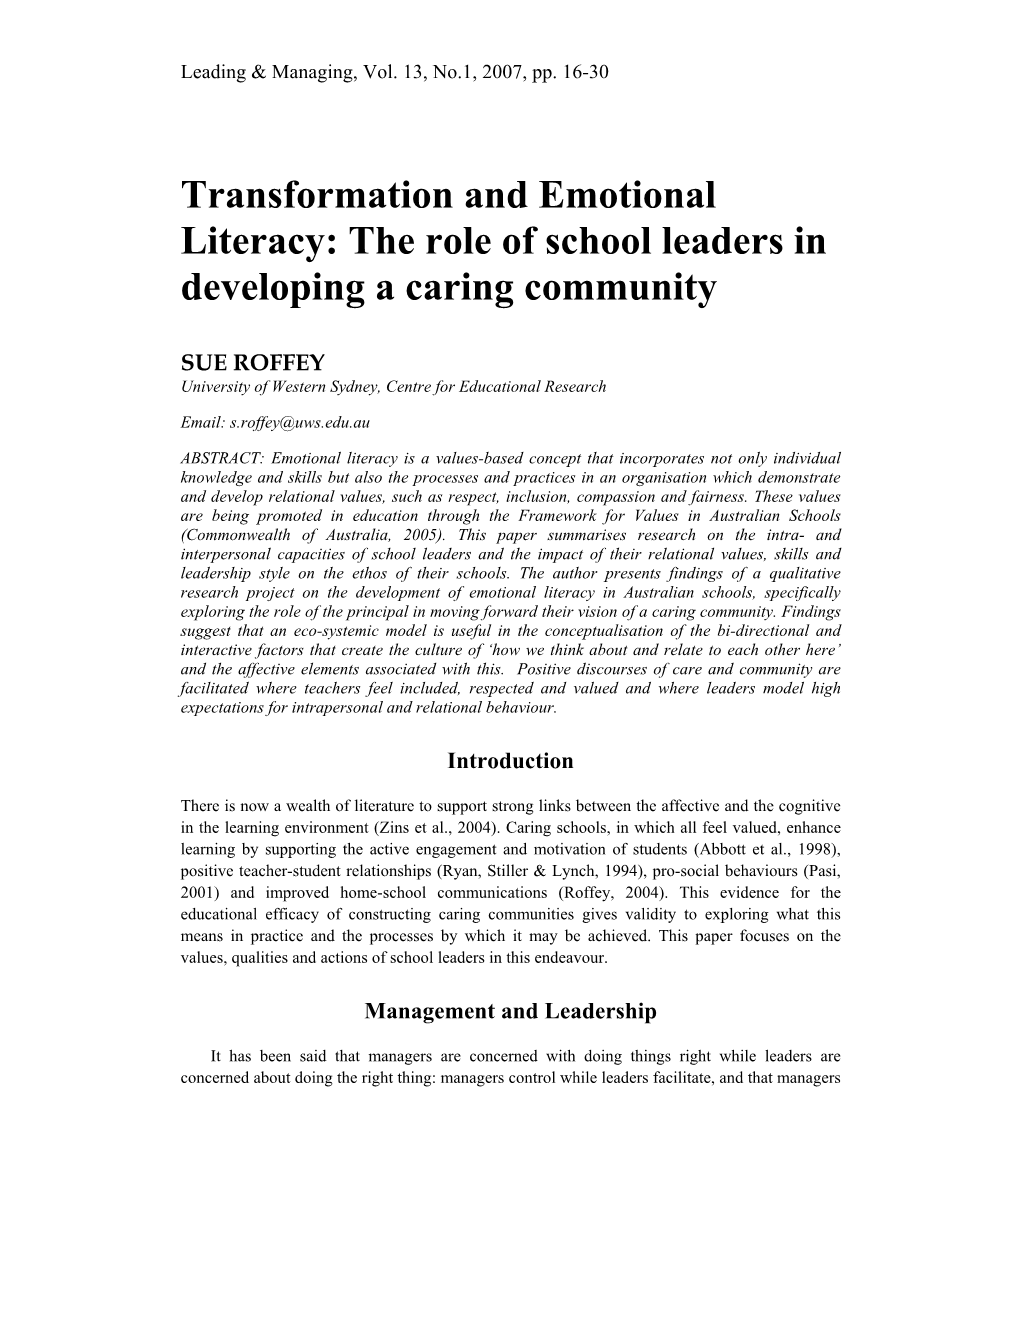 Transformation and Emotional Literacy: the Role of School Leaders in Developing a Caring Community